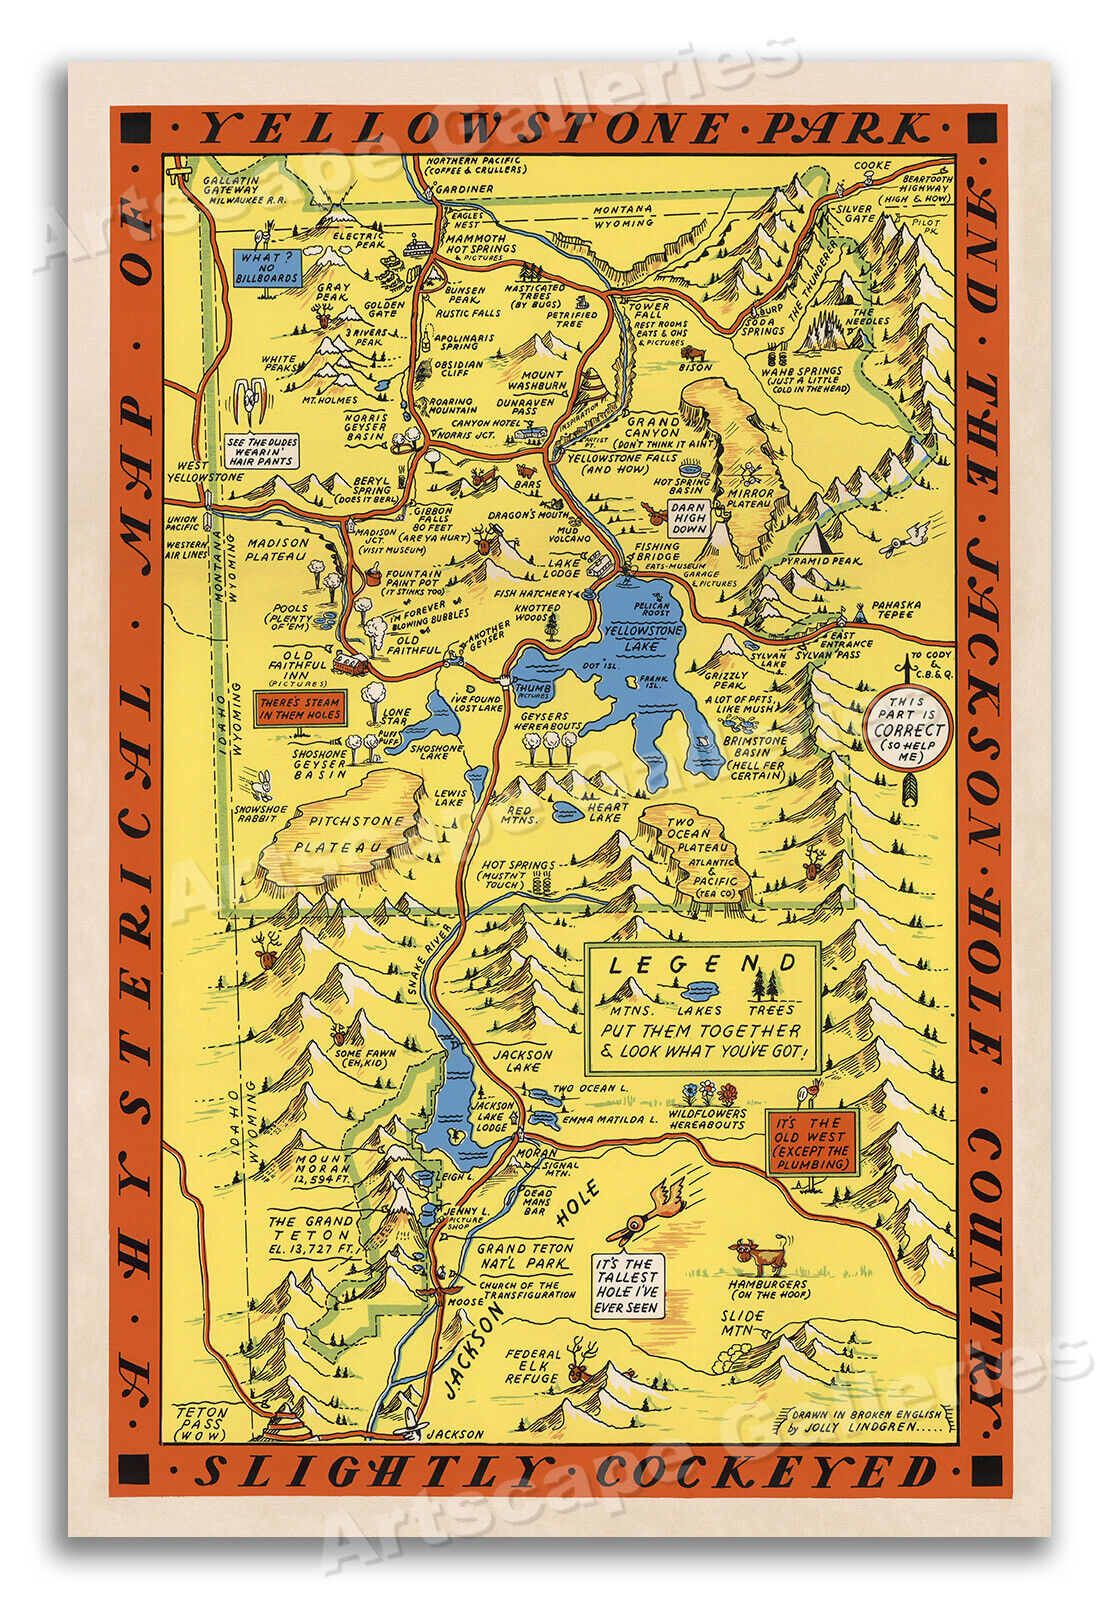 Yellowstone National Park - 1936 Hysterical Illustrated Map - 20x30